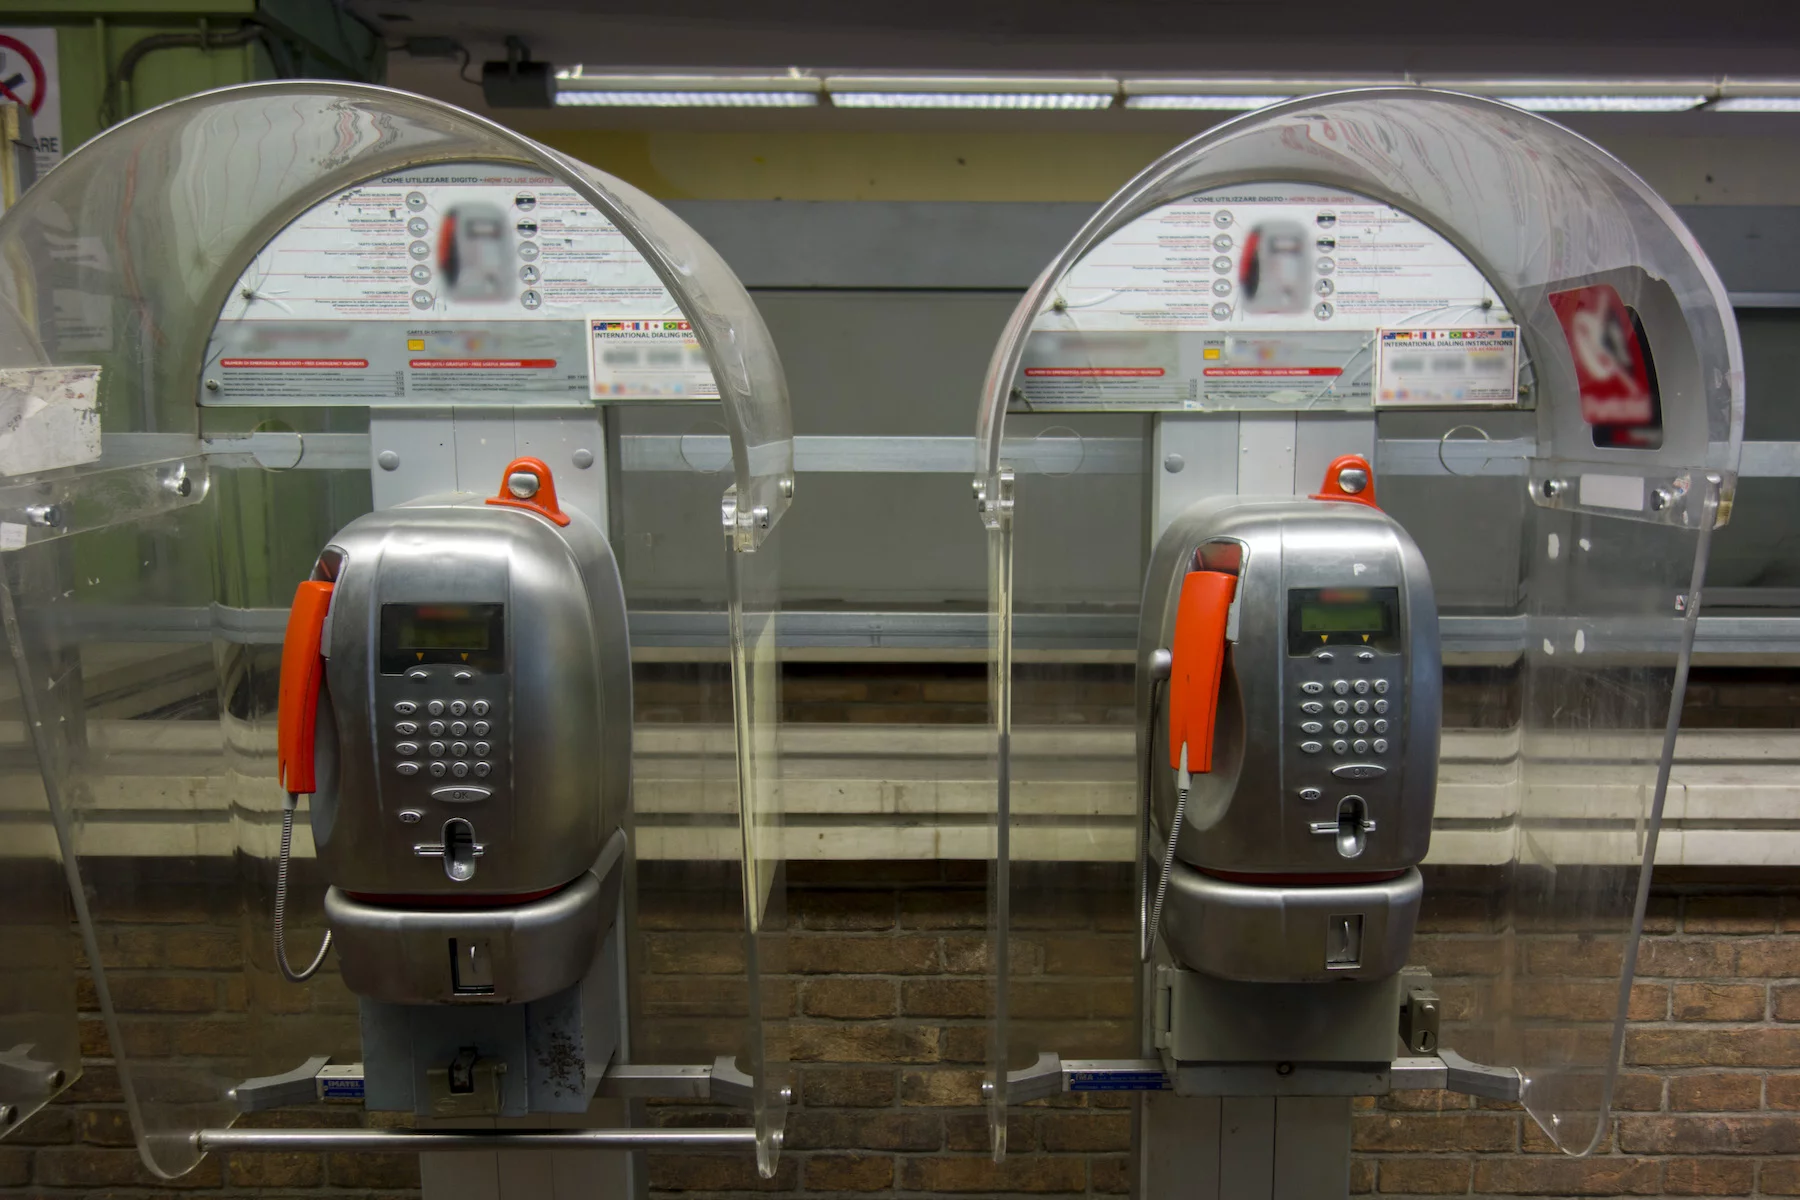 Two identical Italian public phones stand side-by-side against a brick wall